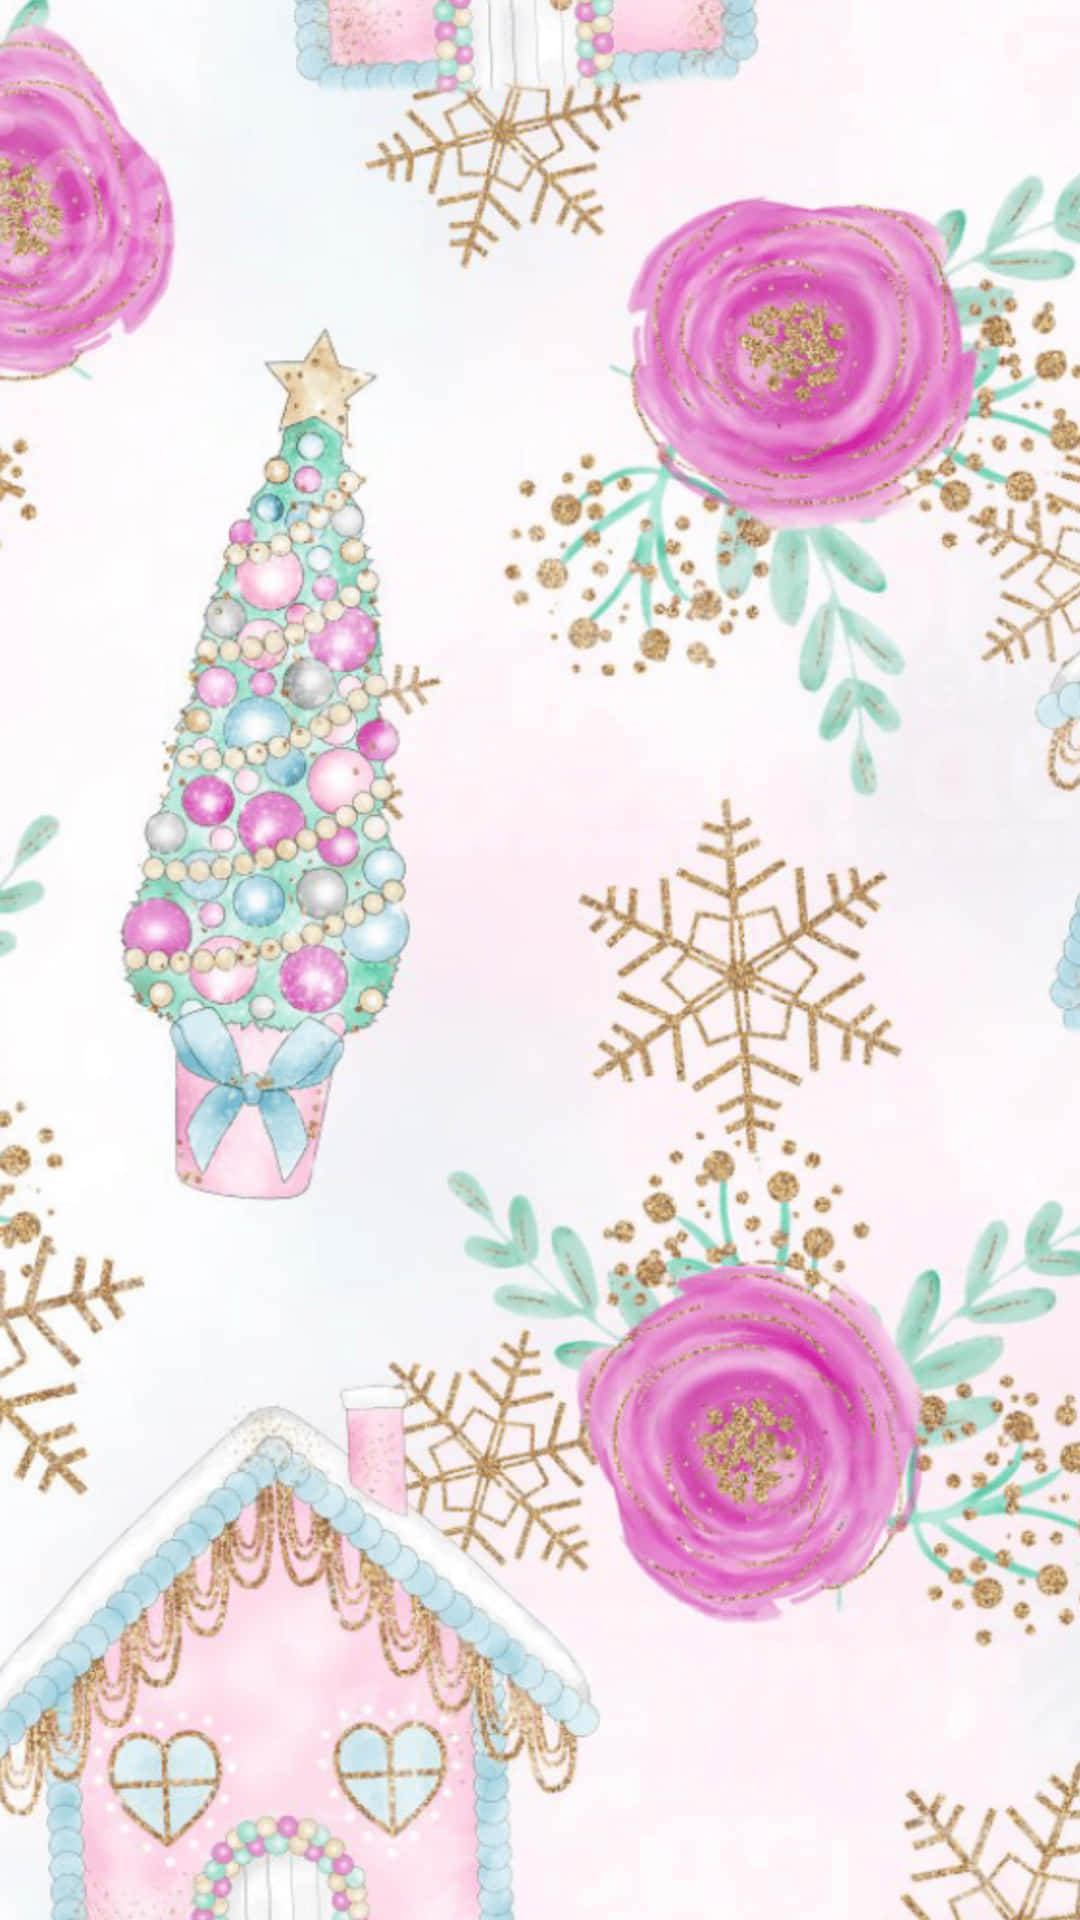 A Pink And White Christmas Pattern With A Tree And Snowflakes Wallpaper